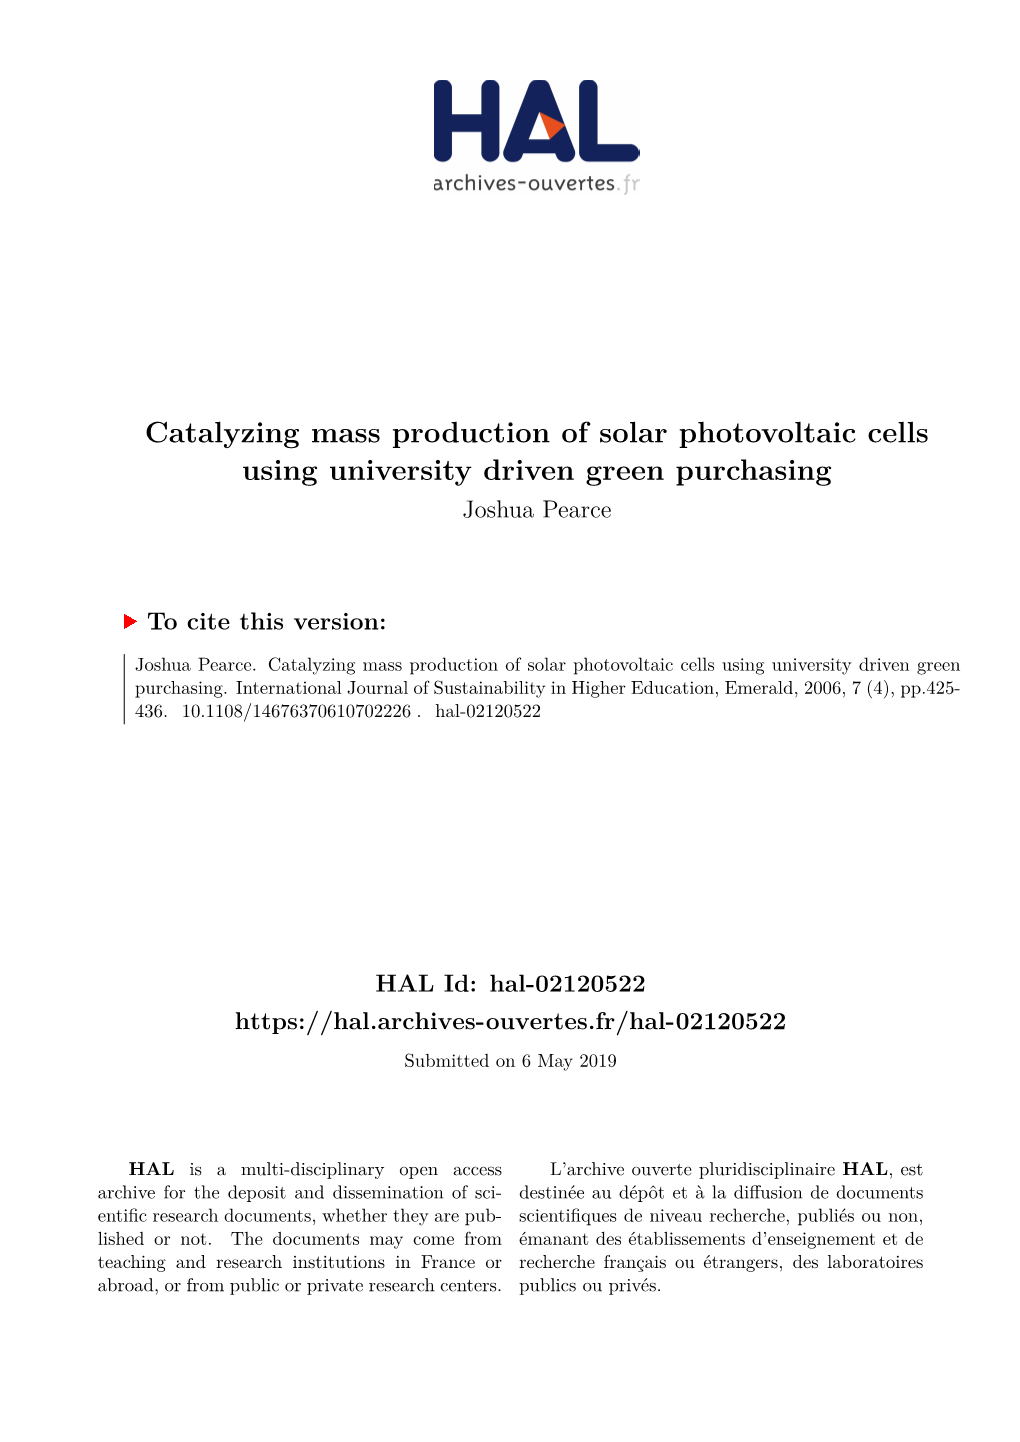 Catalyzing Mass Production of Solar Photovoltaic Cells Using University Driven Green Purchasing Joshua Pearce